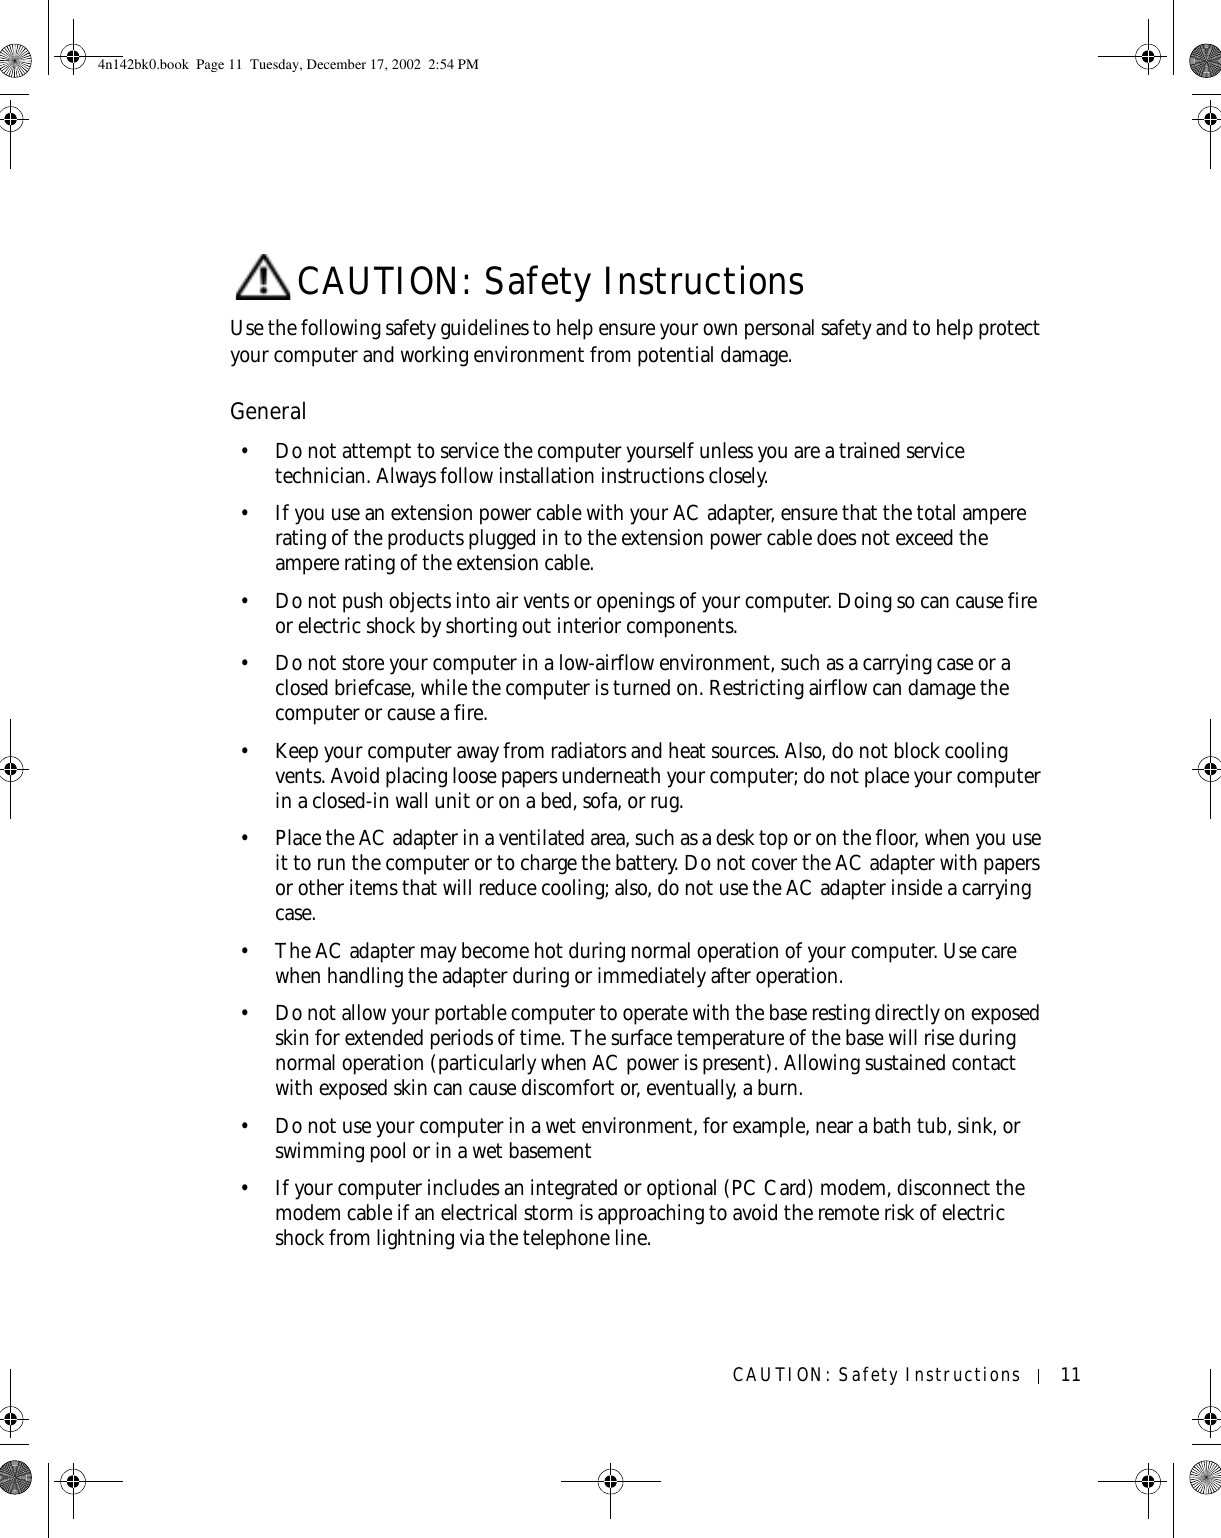 CAUTION: Safety Instructions 11CAUTION: Safety InstructionsUse the following safety guidelines to help ensure your own personal safety and to help protect your computer and working environment from potential damage.General• Do not attempt to service the computer yourself unless you are a trained service technician. Always follow installation instructions closely.• If you use an extension power cable with your AC adapter, ensure that the total ampere rating of the products plugged in to the extension power cable does not exceed the ampere rating of the extension cable.• Do not push objects into air vents or openings of your computer. Doing so can cause fire or electric shock by shorting out interior components.• Do not store your computer in a low-airflow environment, such as a carrying case or a closed briefcase, while the computer is turned on. Restricting airflow can damage the computer or cause a fire.• Keep your computer away from radiators and heat sources. Also, do not block cooling vents. Avoid placing loose papers underneath your computer; do not place your computer in a closed-in wall unit or on a bed, sofa, or rug.• Place the AC adapter in a ventilated area, such as a desk top or on the floor, when you use it to run the computer or to charge the battery. Do not cover the AC adapter with papers or other items that will reduce cooling; also, do not use the AC adapter inside a carrying case.• The AC adapter may become hot during normal operation of your computer. Use care when handling the adapter during or immediately after operation.• Do not allow your portable computer to operate with the base resting directly on exposed skin for extended periods of time. The surface temperature of the base will rise during normal operation (particularly when AC power is present). Allowing sustained contact with exposed skin can cause discomfort or, eventually, a burn.• Do not use your computer in a wet environment, for example, near a bath tub, sink, or swimming pool or in a wet basement• If your computer includes an integrated or optional (PC Card) modem, disconnect the modem cable if an electrical storm is approaching to avoid the remote risk of electric shock from lightning via the telephone line.4n142bk0.book  Page 11  Tuesday, December 17, 2002  2:54 PM